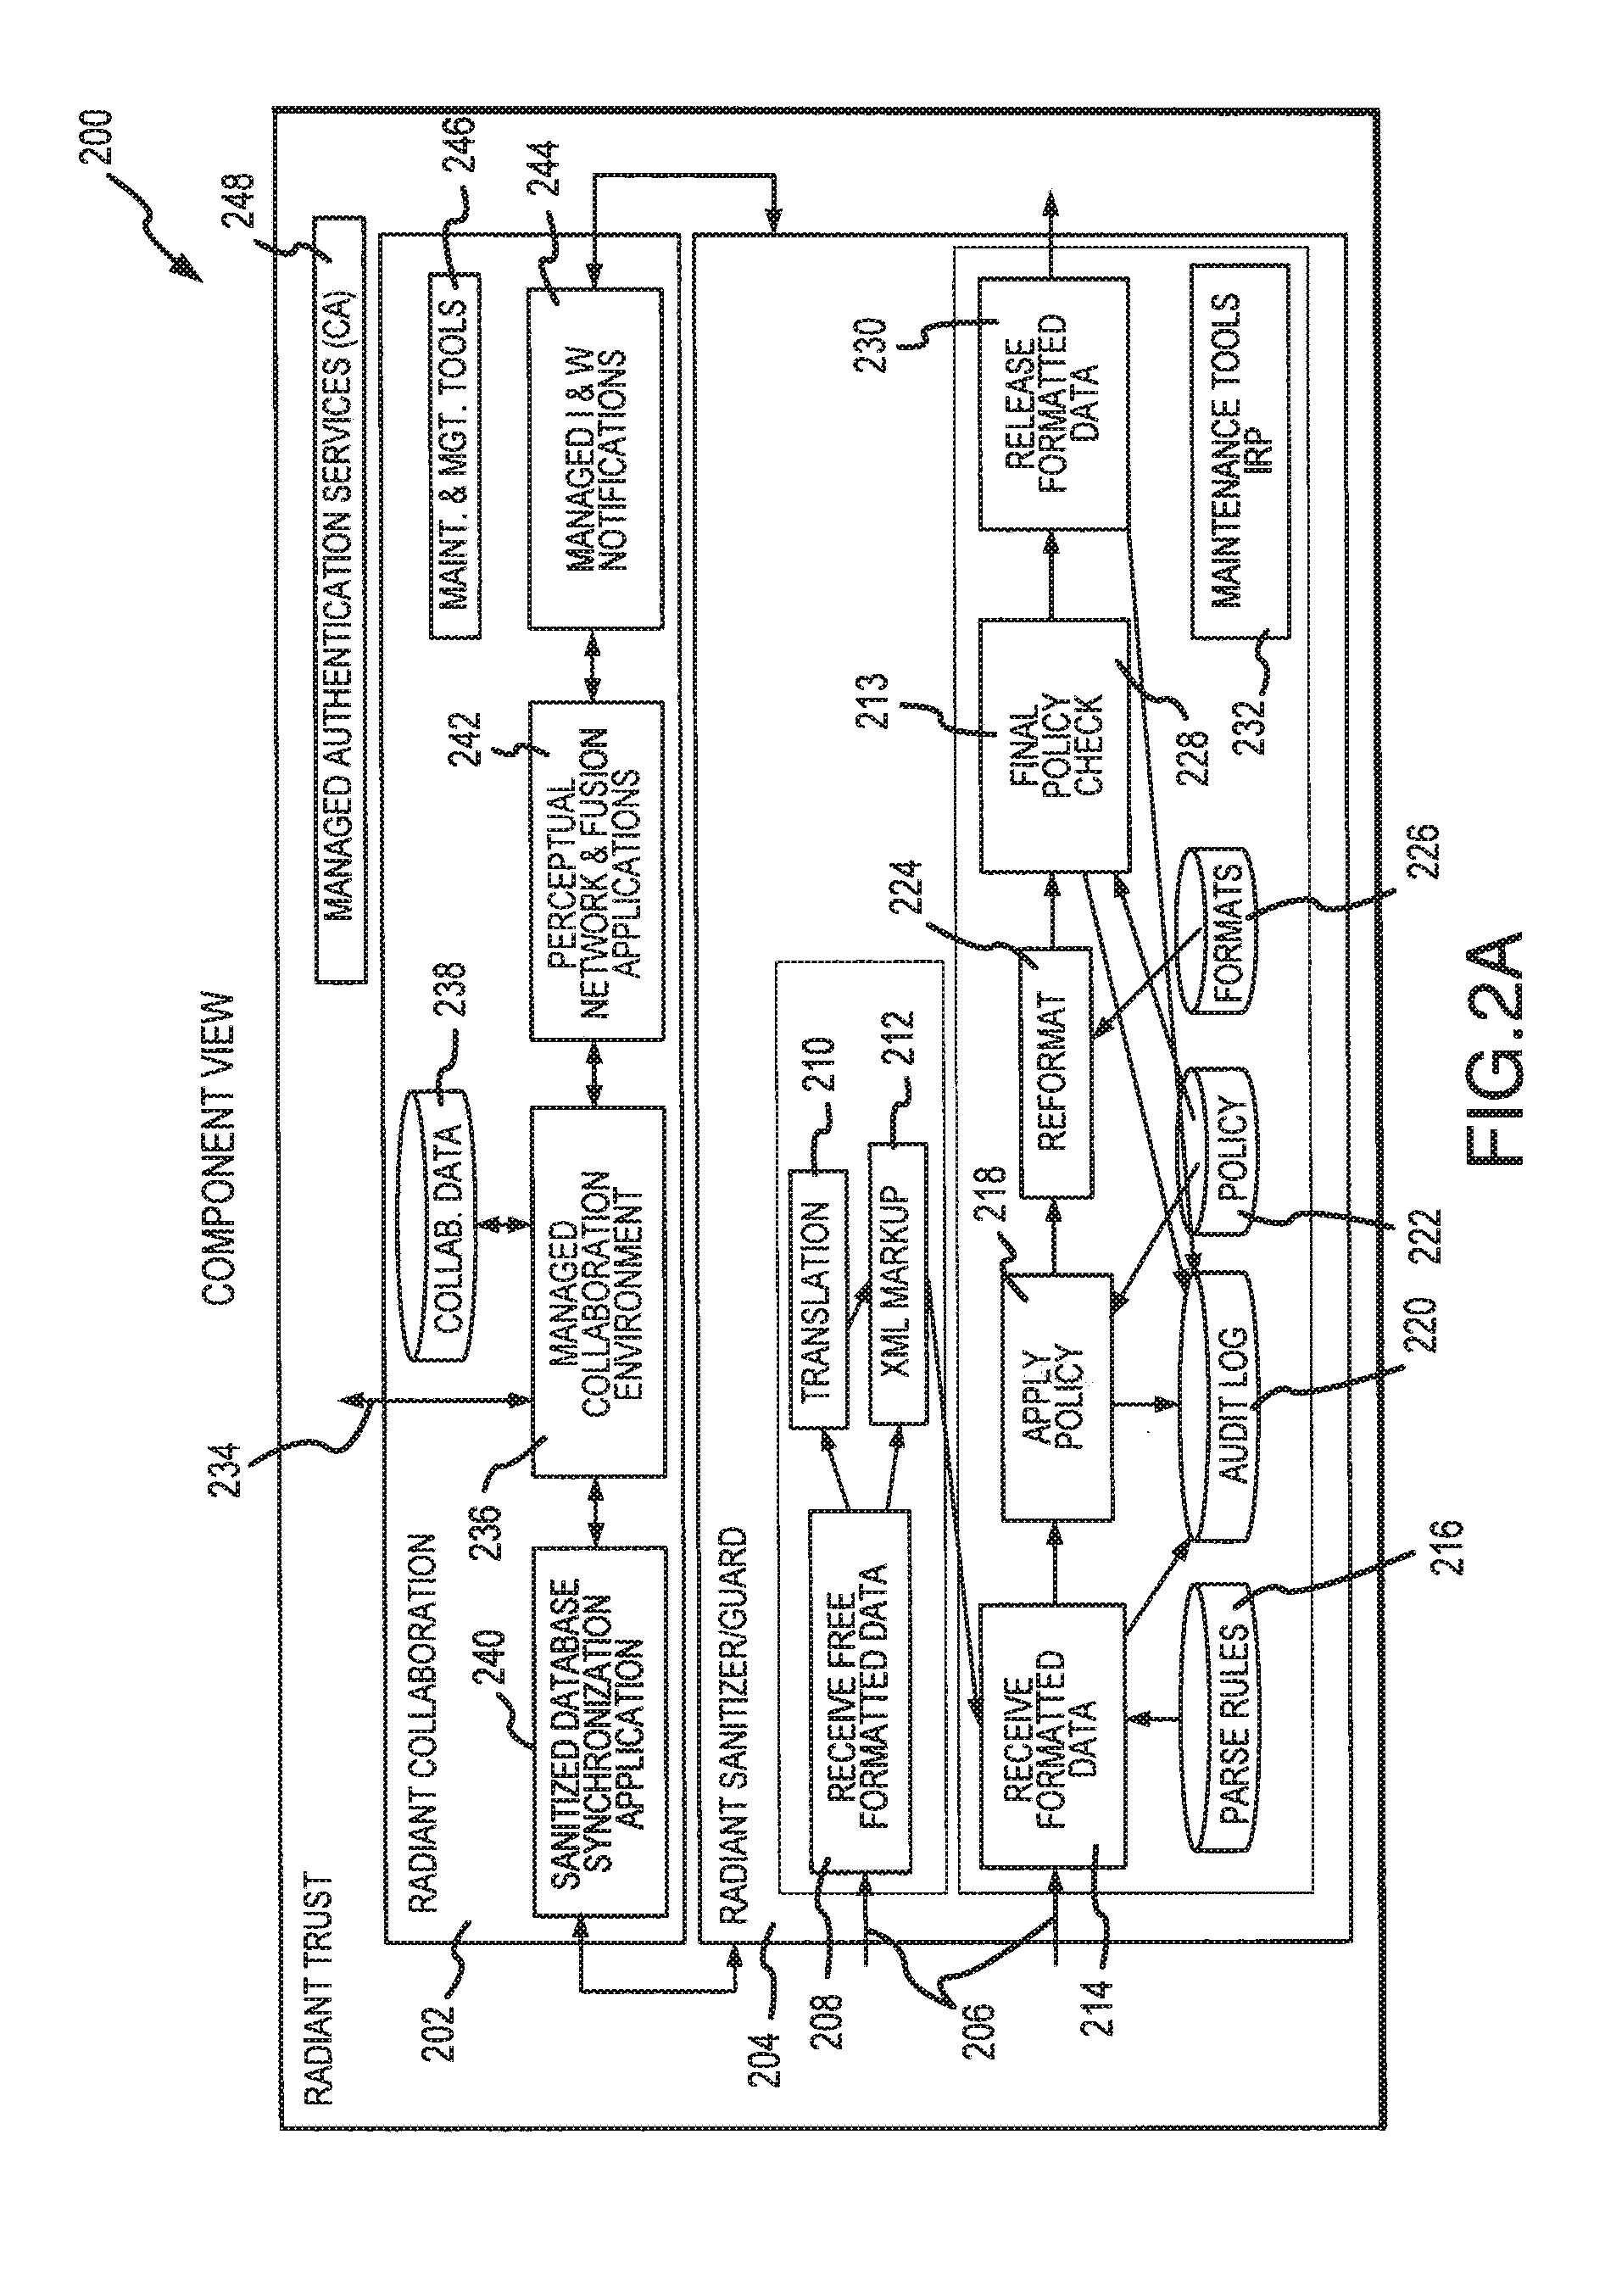 System for enabling collaboration and protecting sensitive data